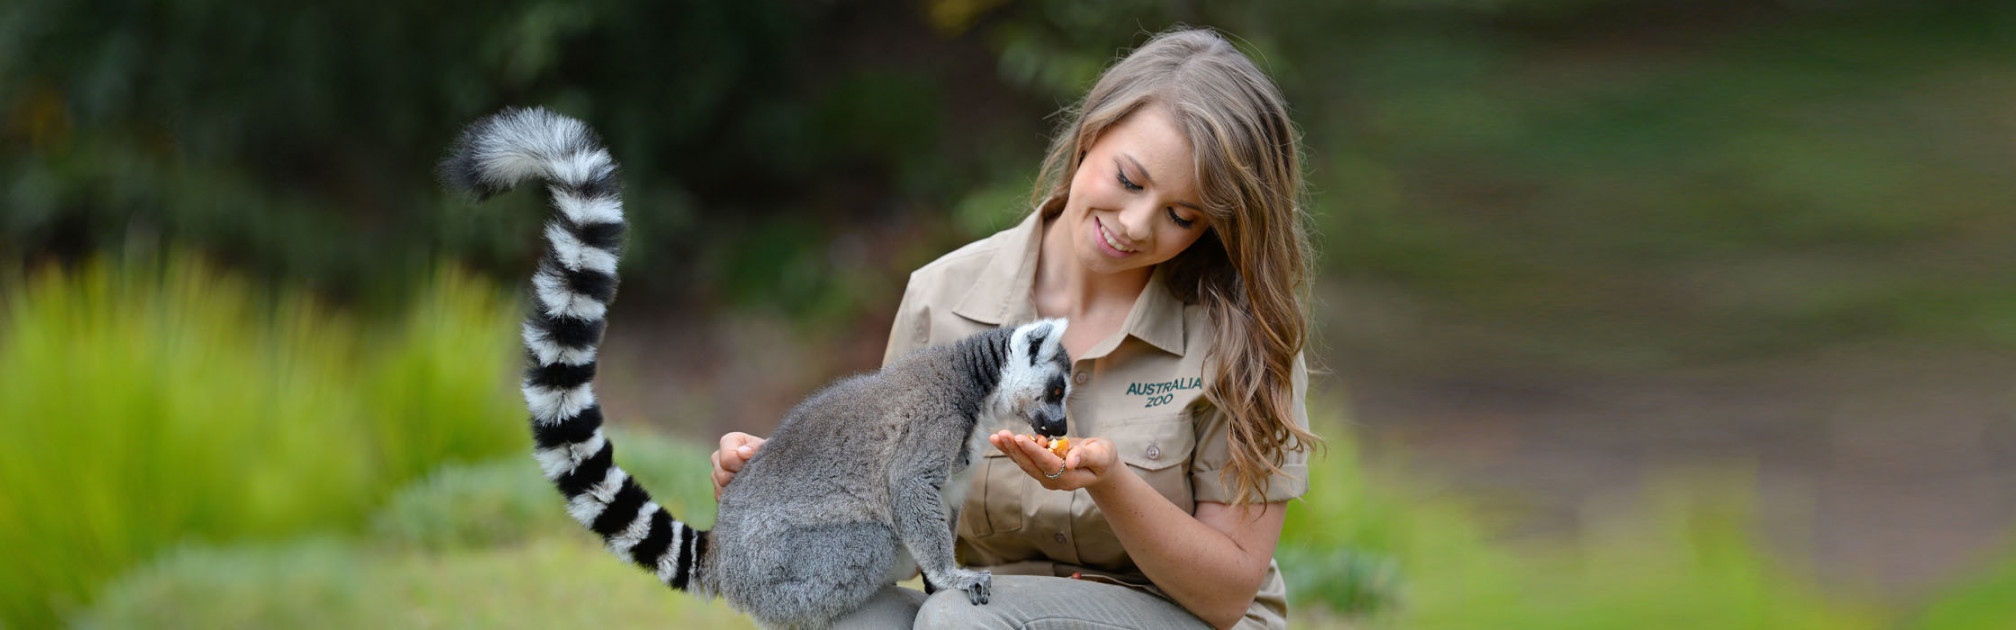 Event Calendar at Australia Zoo - Where Every Month Is A Celebration!